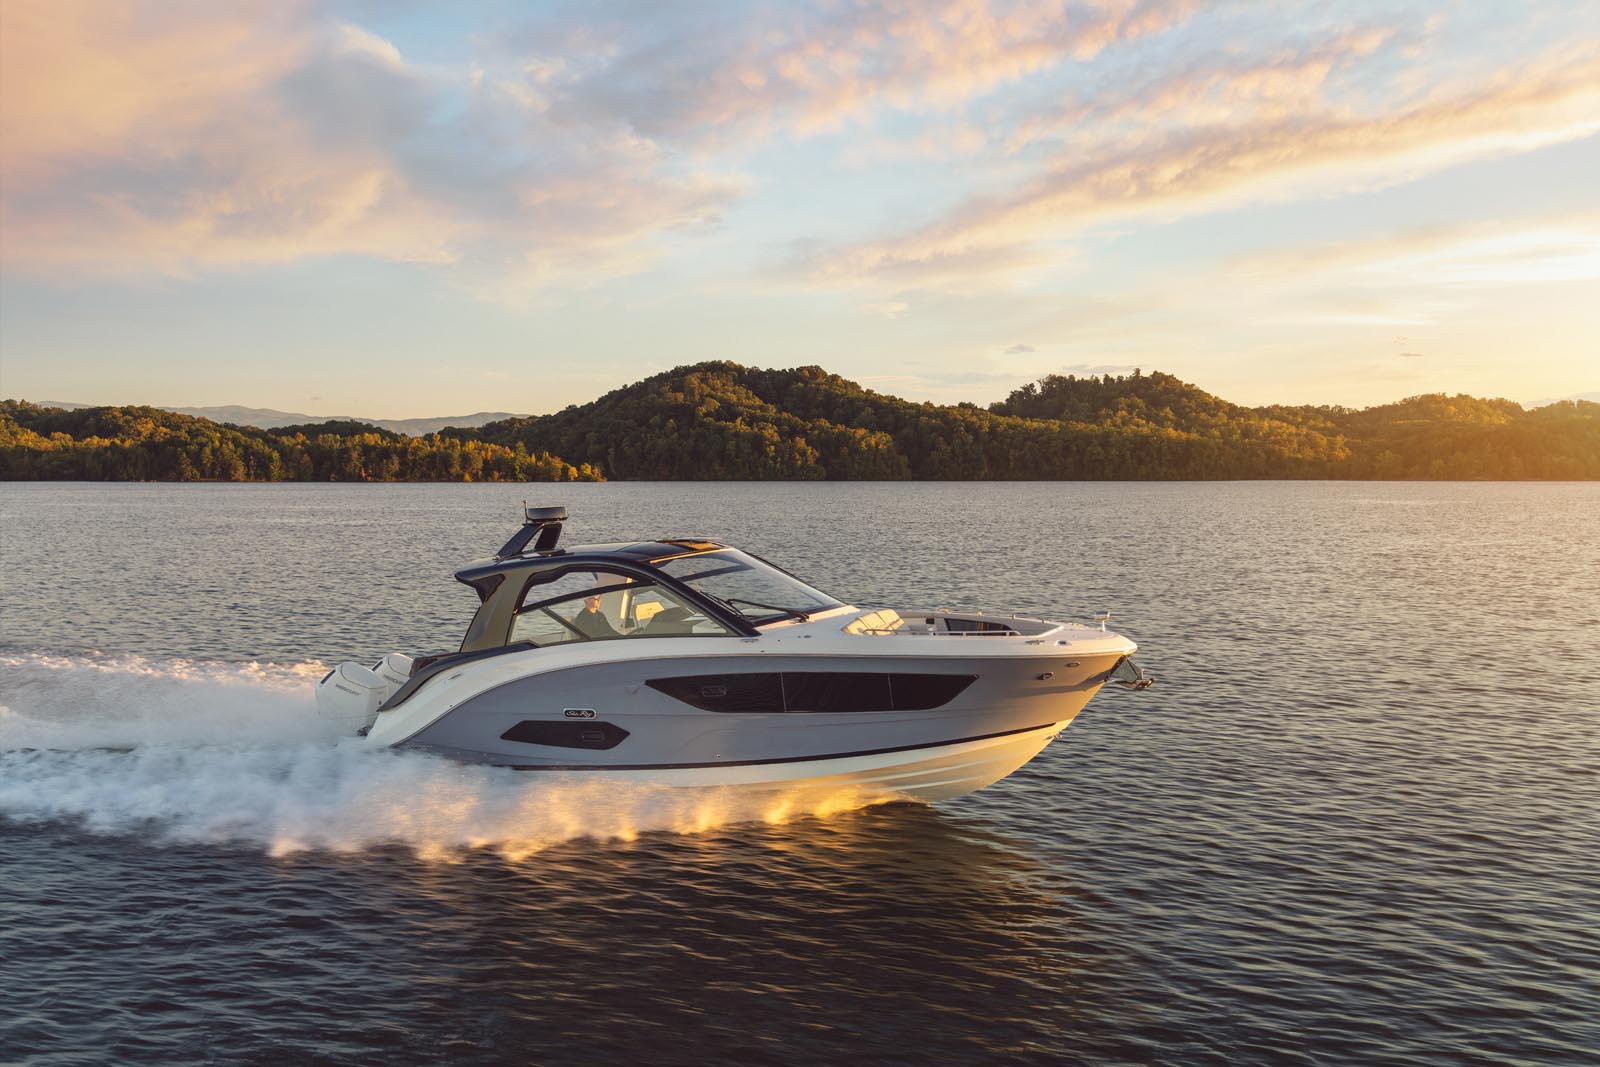 2023-Sundancer-370-Outboard-DAO370-running-starboard-bow-engines-V12-600hp-03171-select